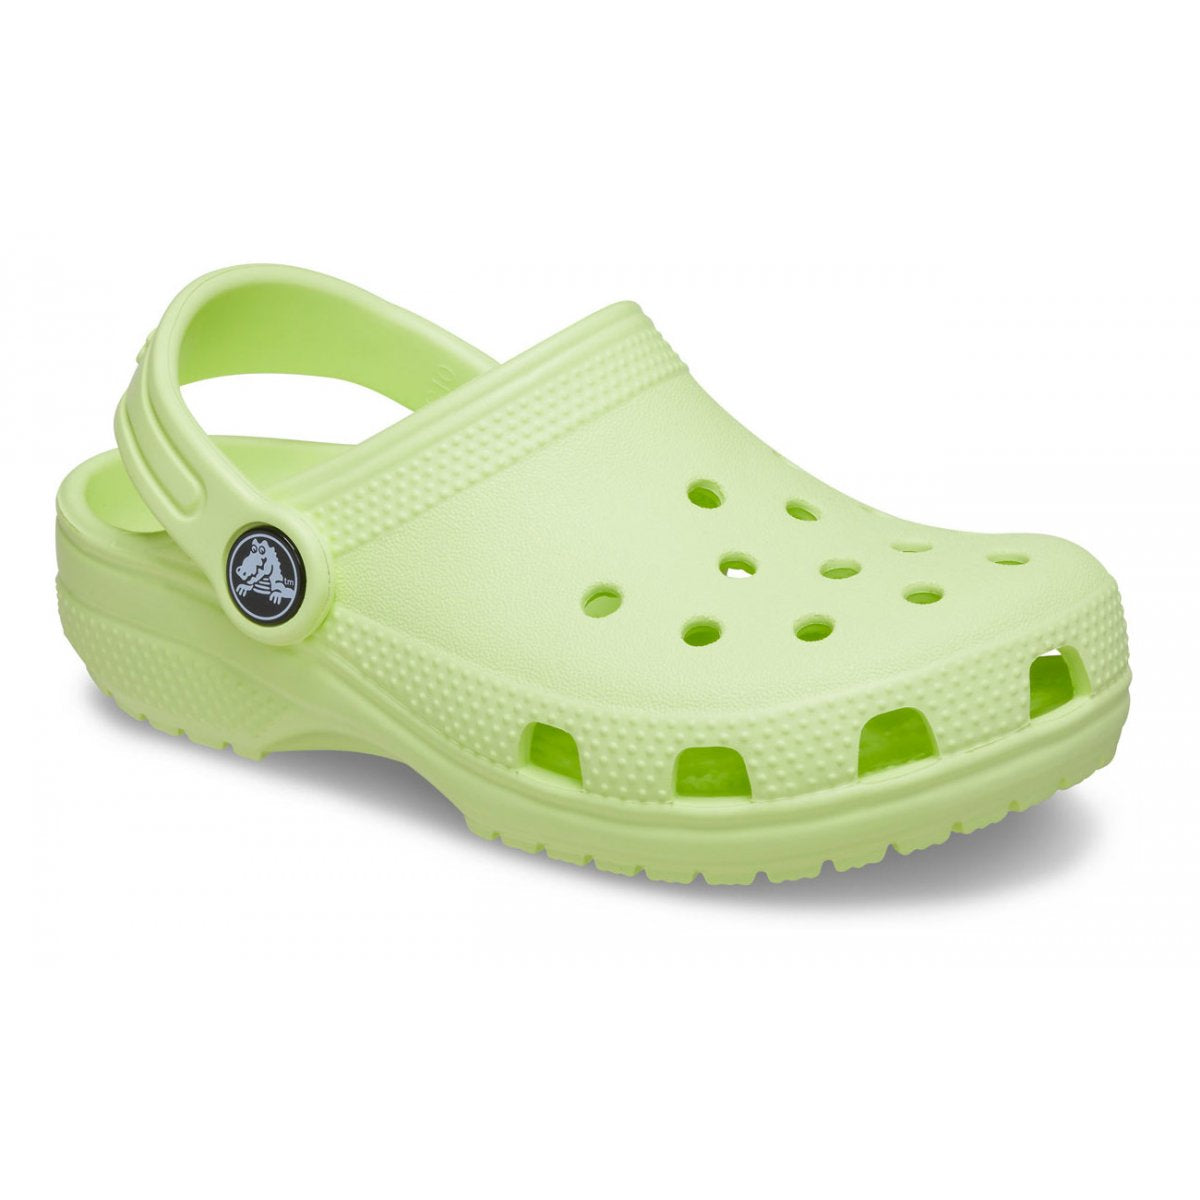 a child's green clogs with holes